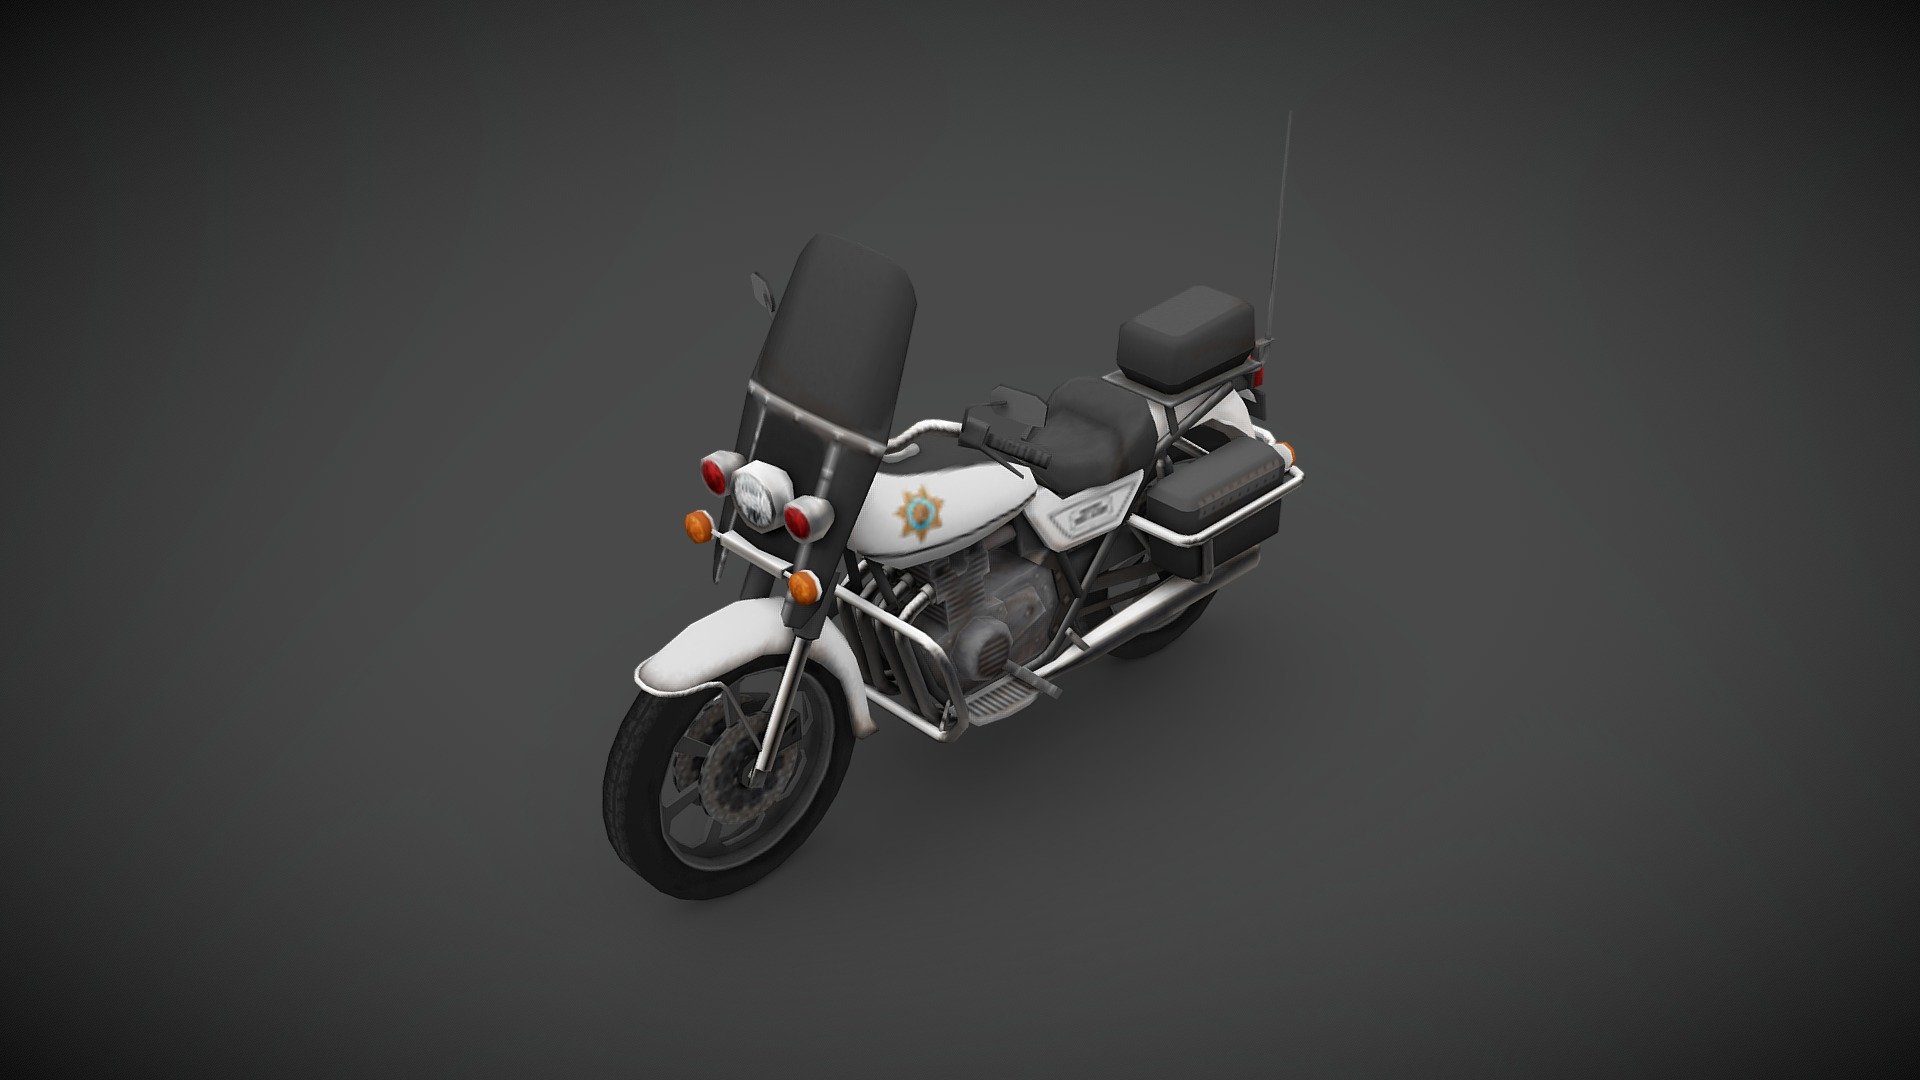 Showcase of a 1980 Kawasaki Kz1000 Police from TV show CHiPs, I've made it for project ZOMBOID, low poly but with a high detail texture, optimized for the game engine. This version is not a 100% true to the original since there are some compromises I’ve had to make to present it here.

You can find the actual version in project ZOMBOID STEAM Workshop 3d model